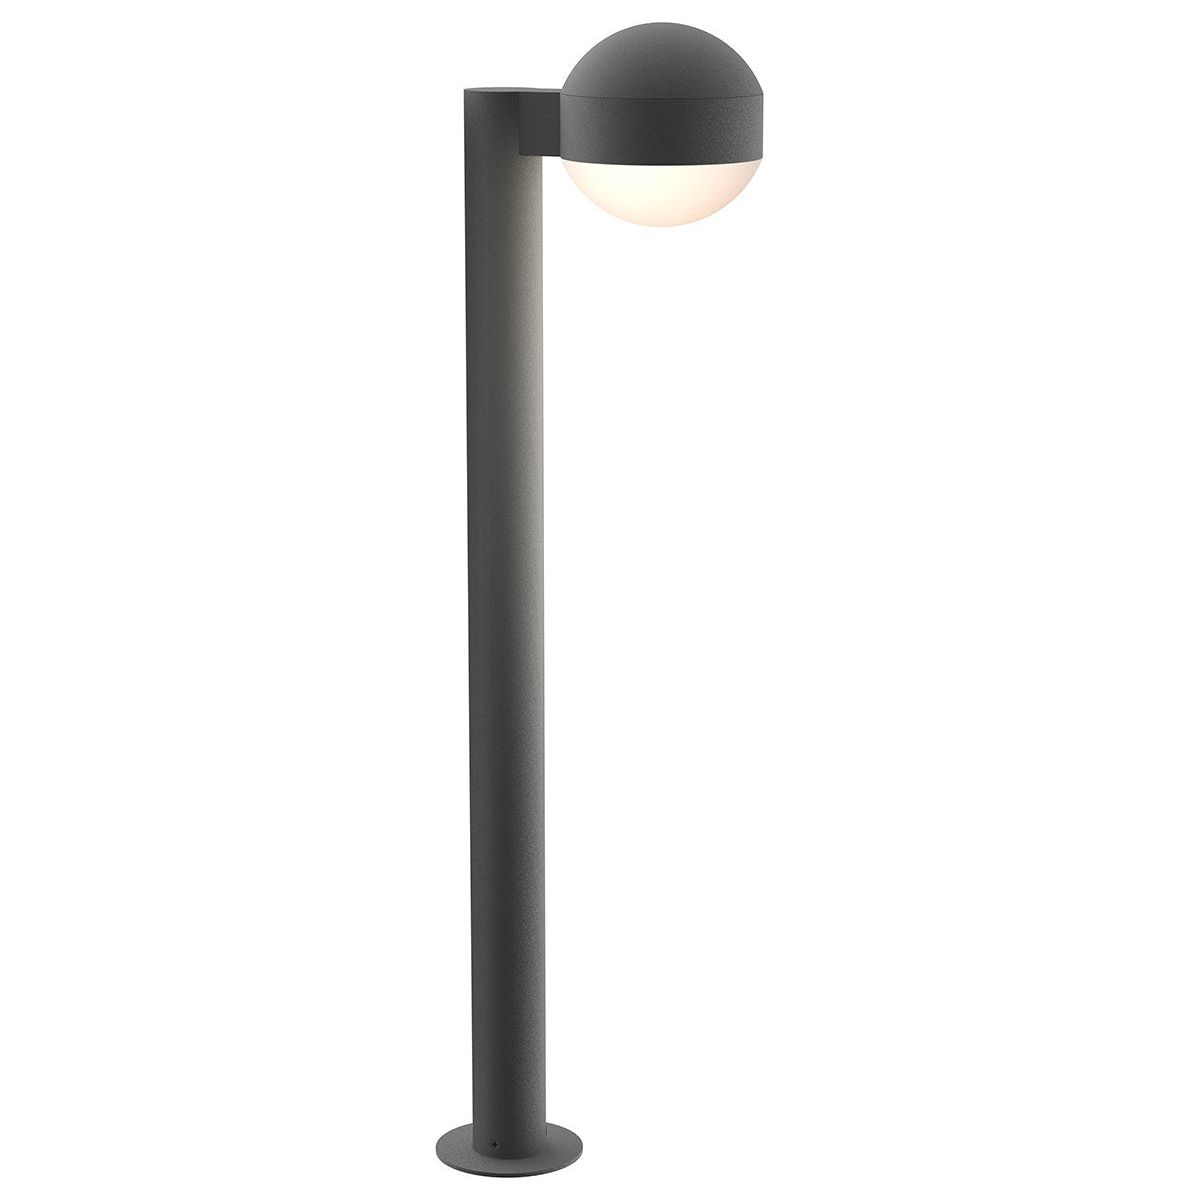 REALS 28" LED Bollard with Dome Cap and Dome Lens